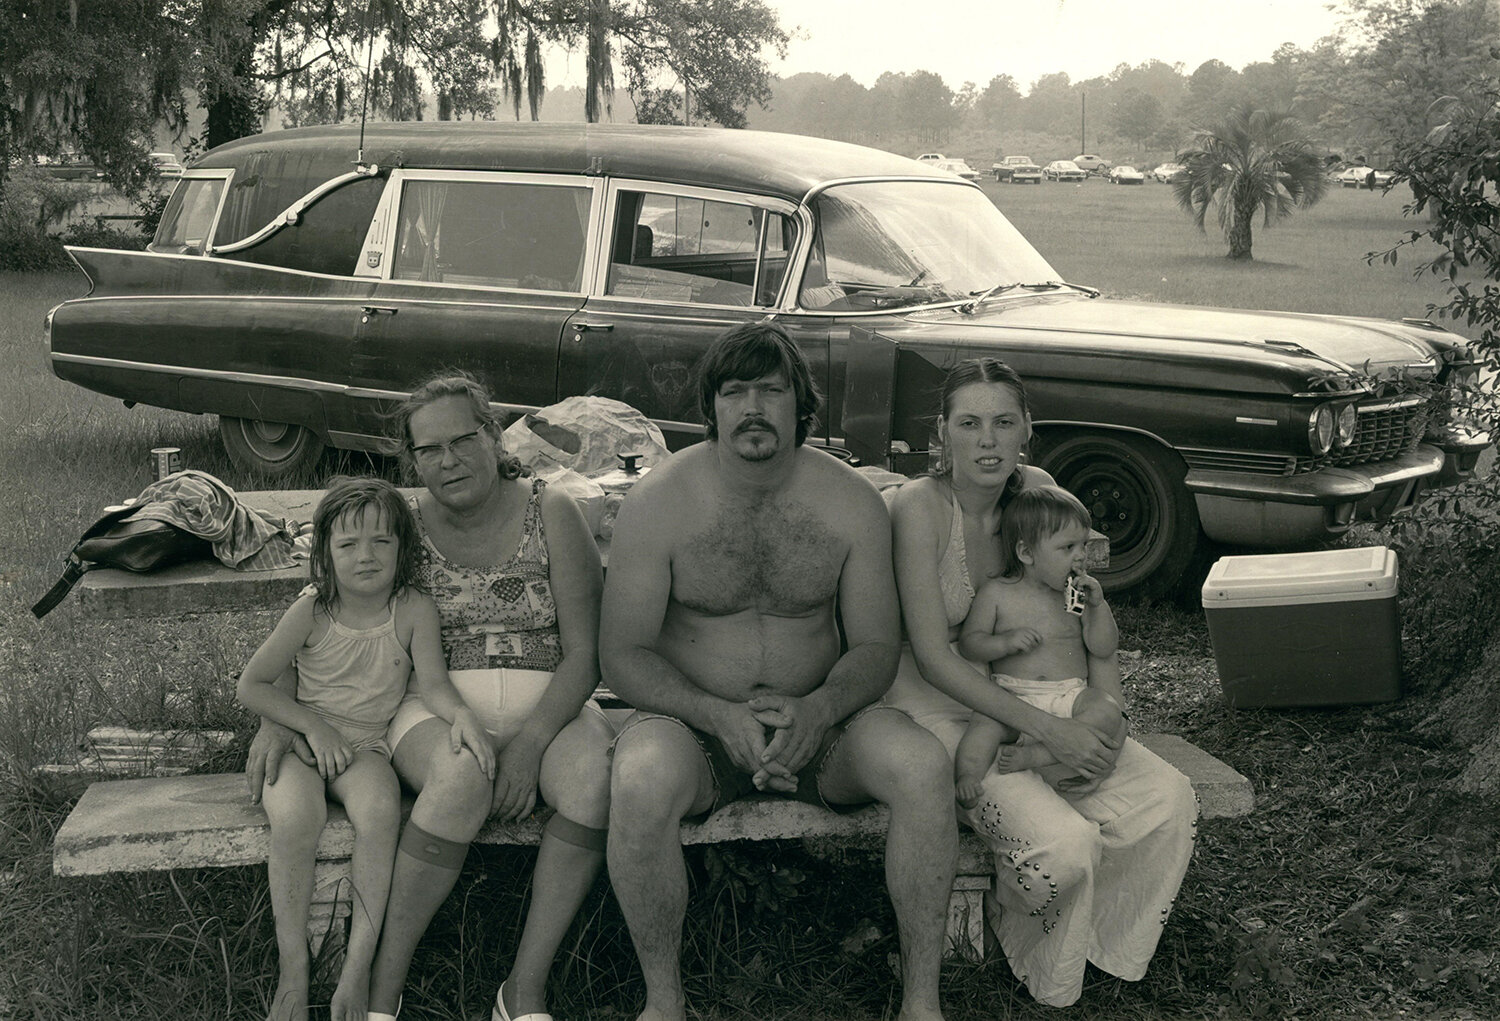   Family and vehicle , 1979 Silver Gelatin Print 10 × 14 3/4 in. (image size) The Do Good Fund, Inc., 2017-27 